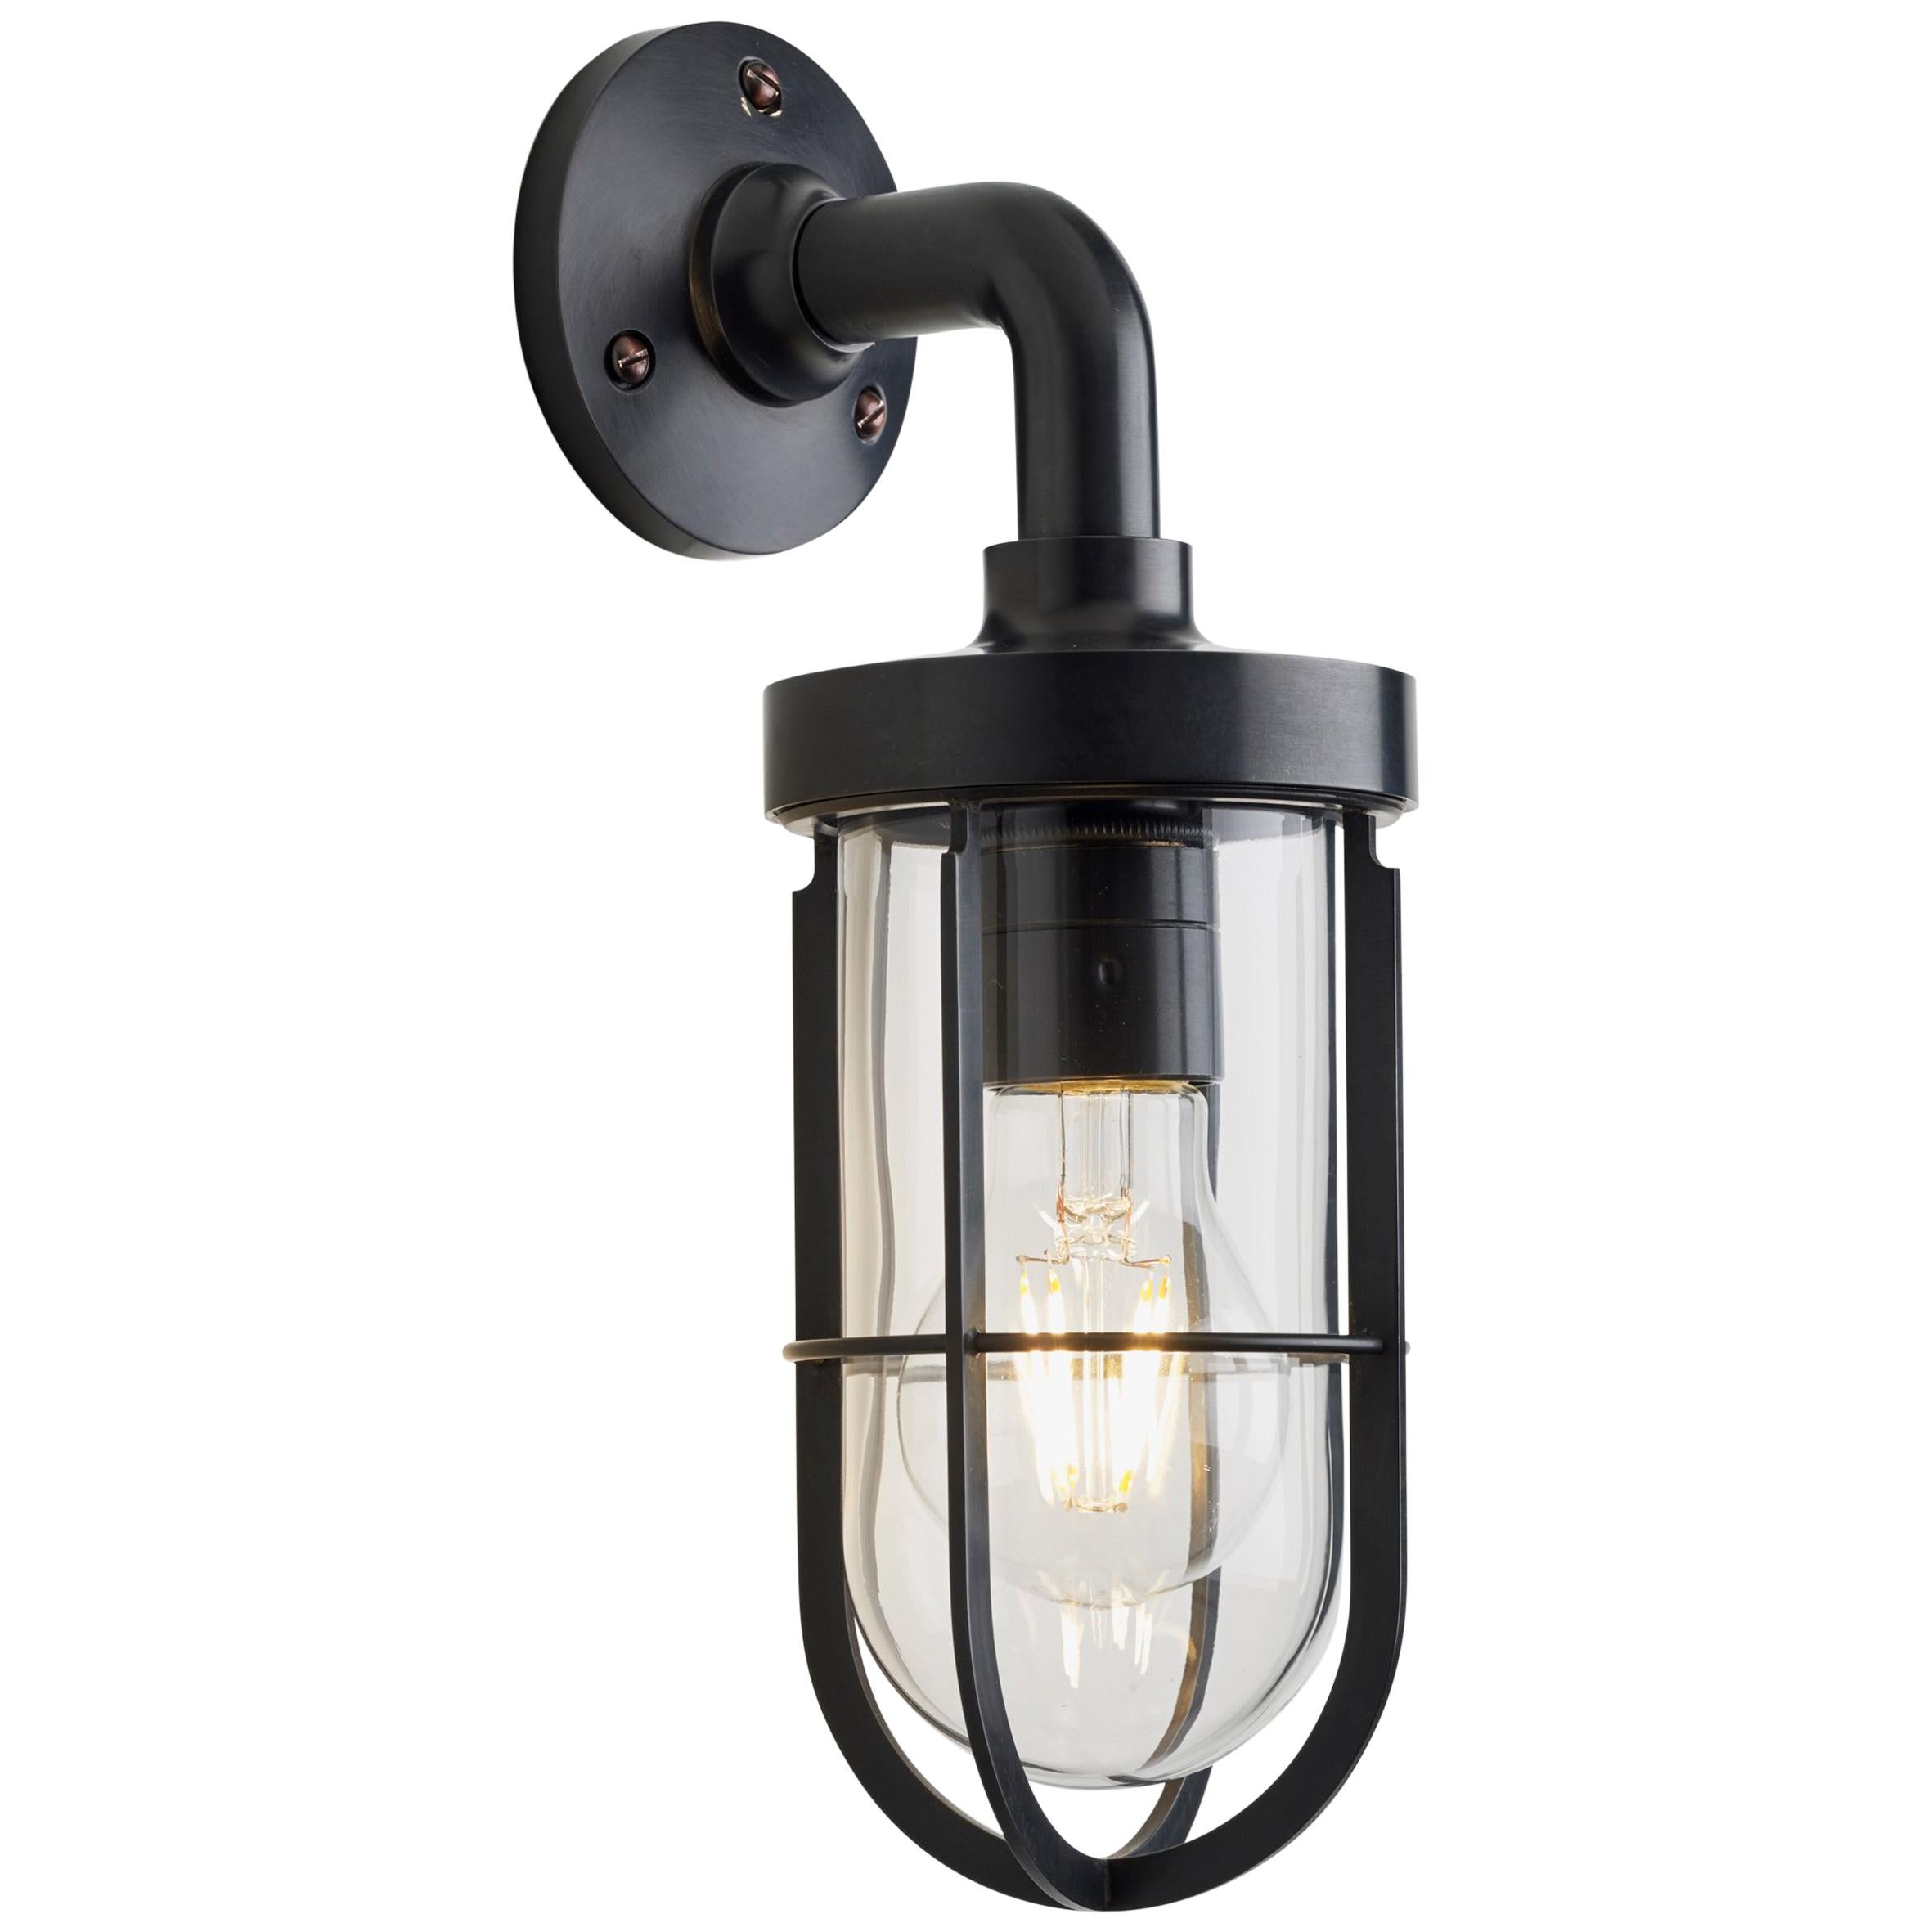 Tekna Docklight Wall Light with Dark Bronze Finish and Clear Glass For Sale